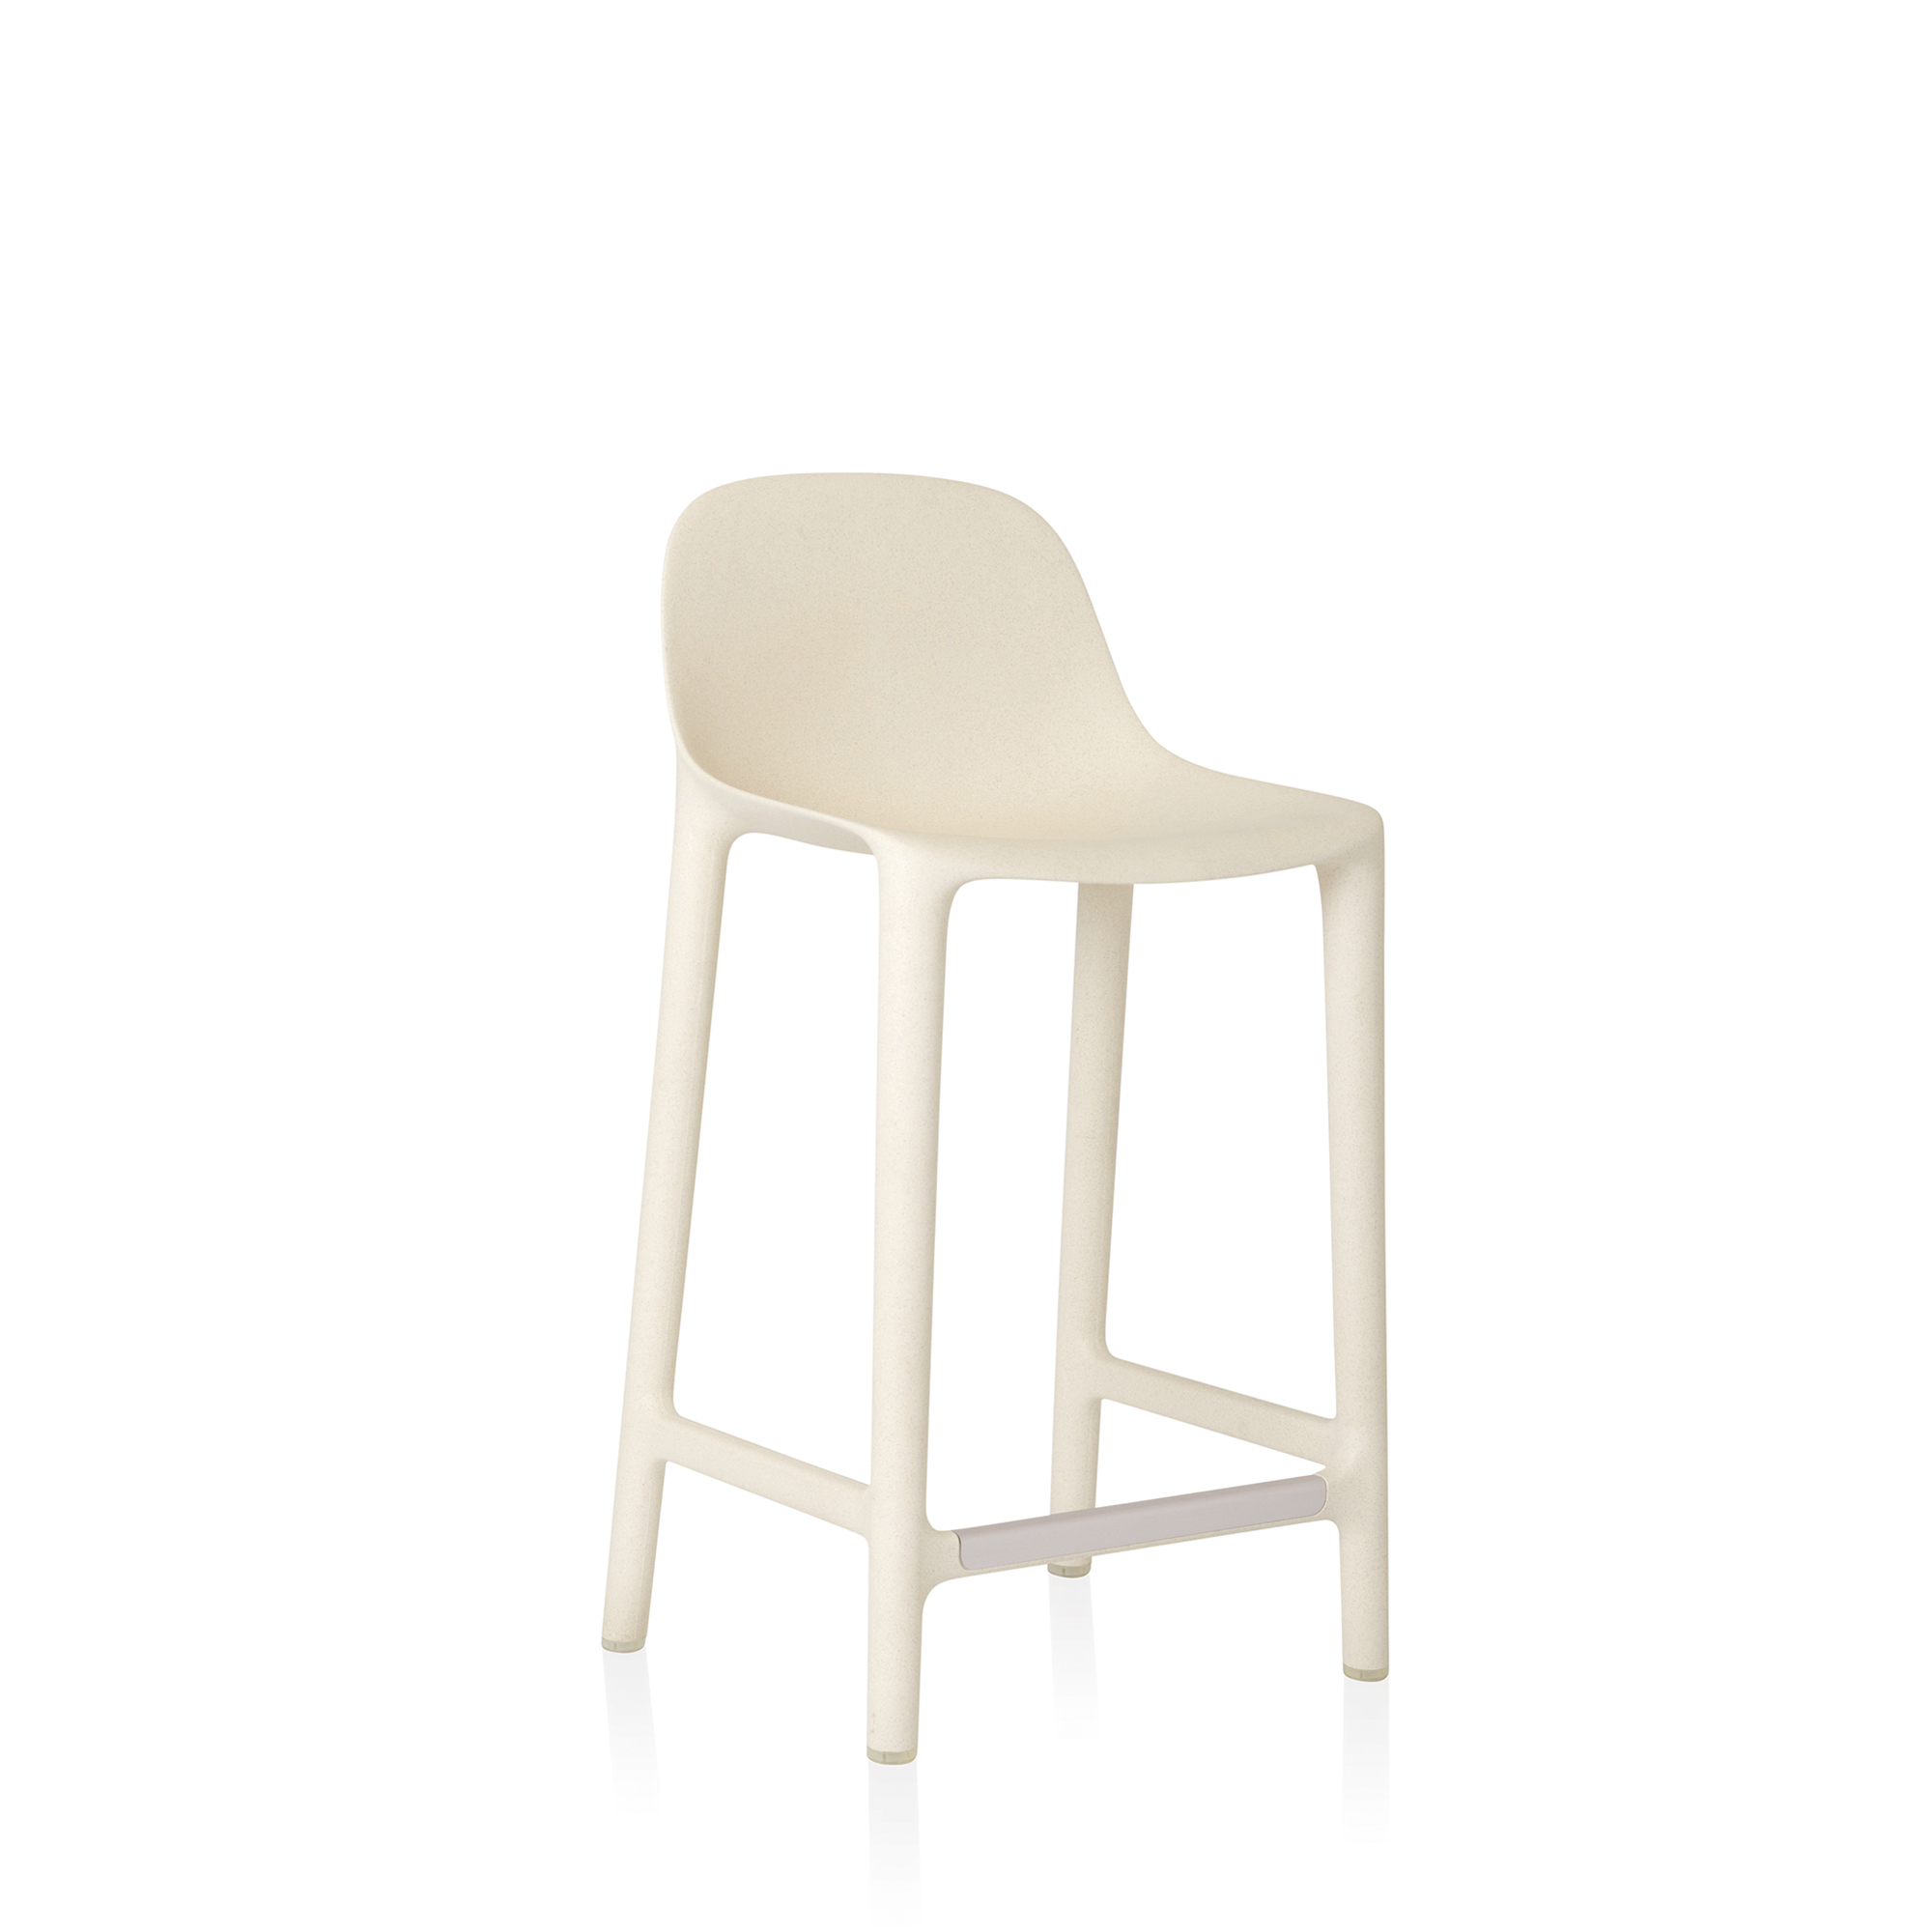 Broom Counter Stool by Phillip Starck